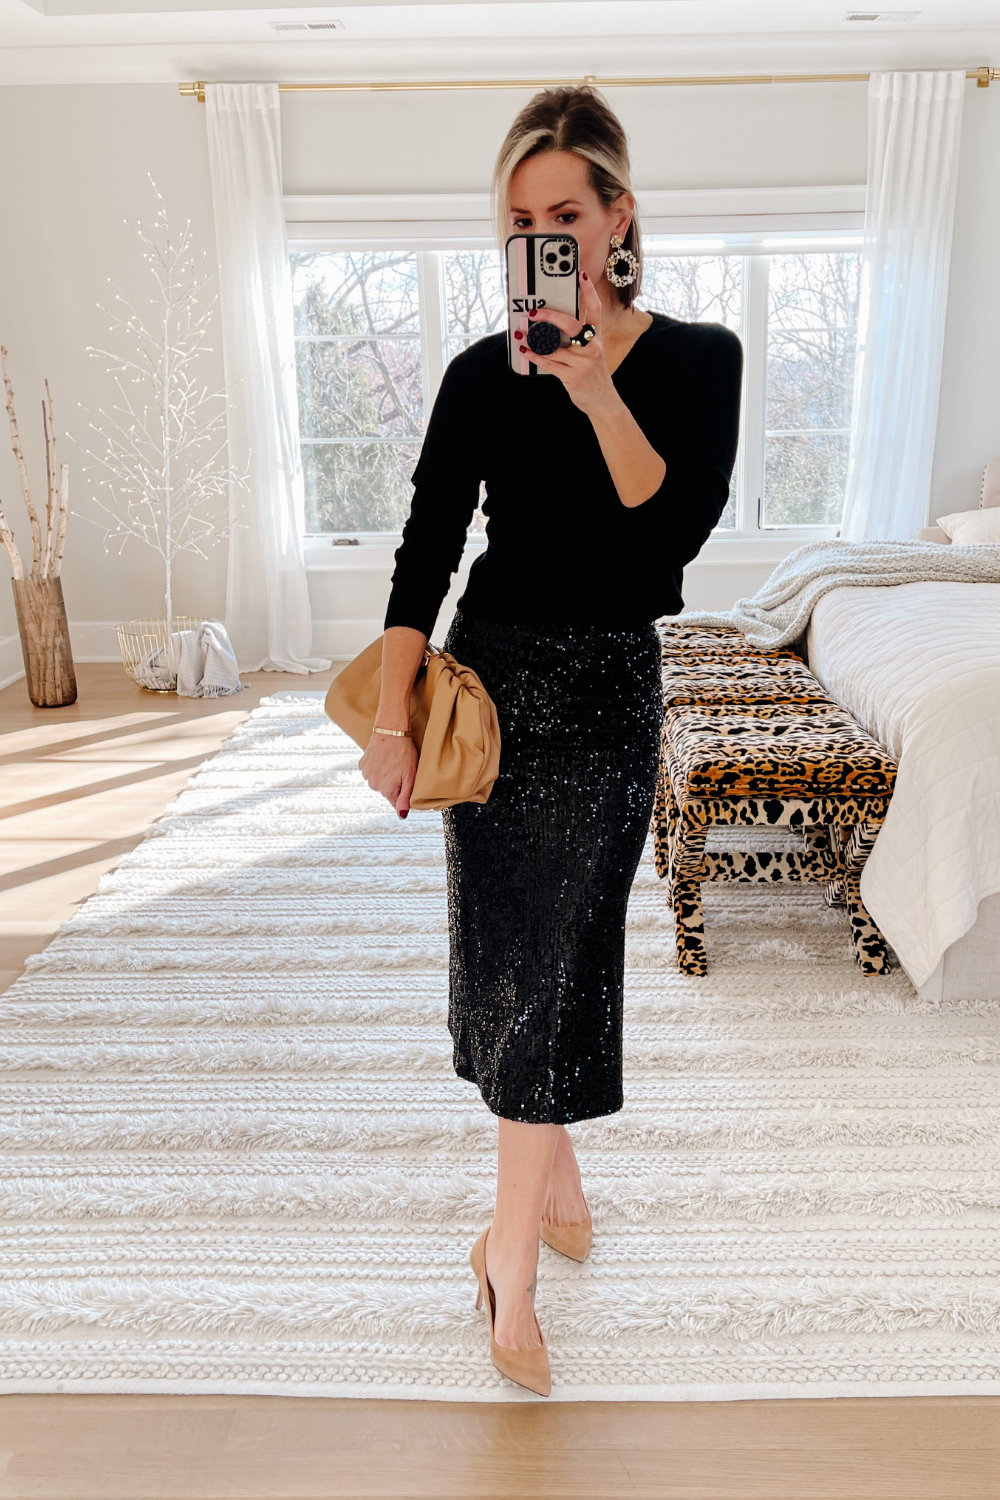 Suzanne wearing a black tee, sequin pencil skirt, nude pumps and a clutch